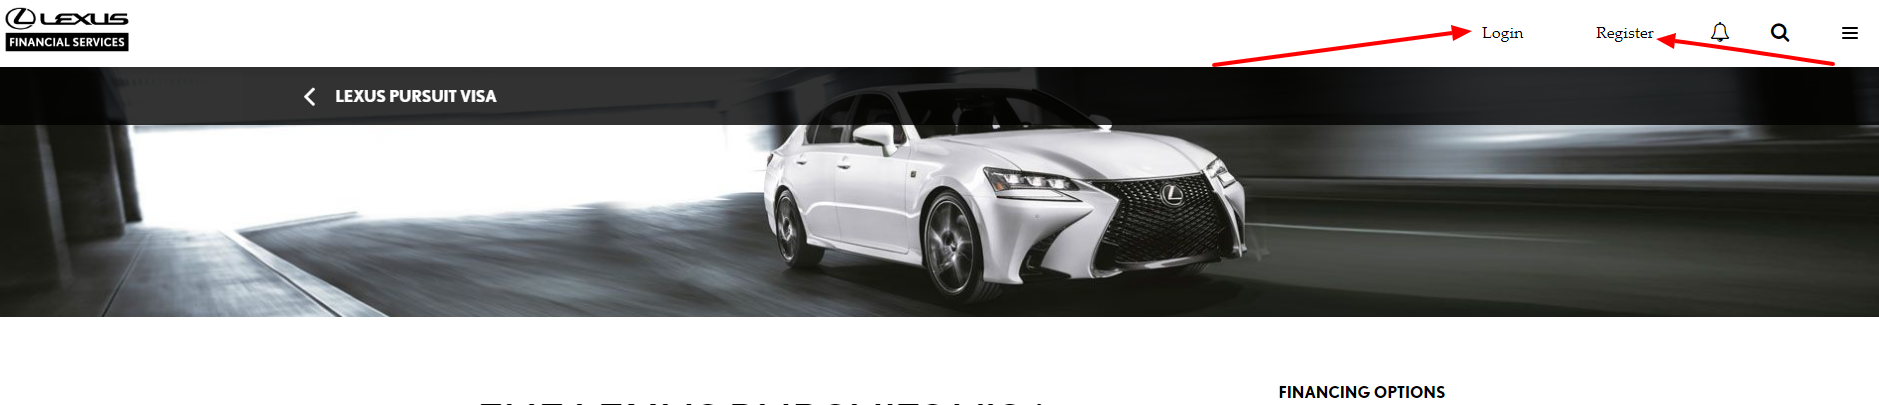 log in to your lexus pursuits credit card account